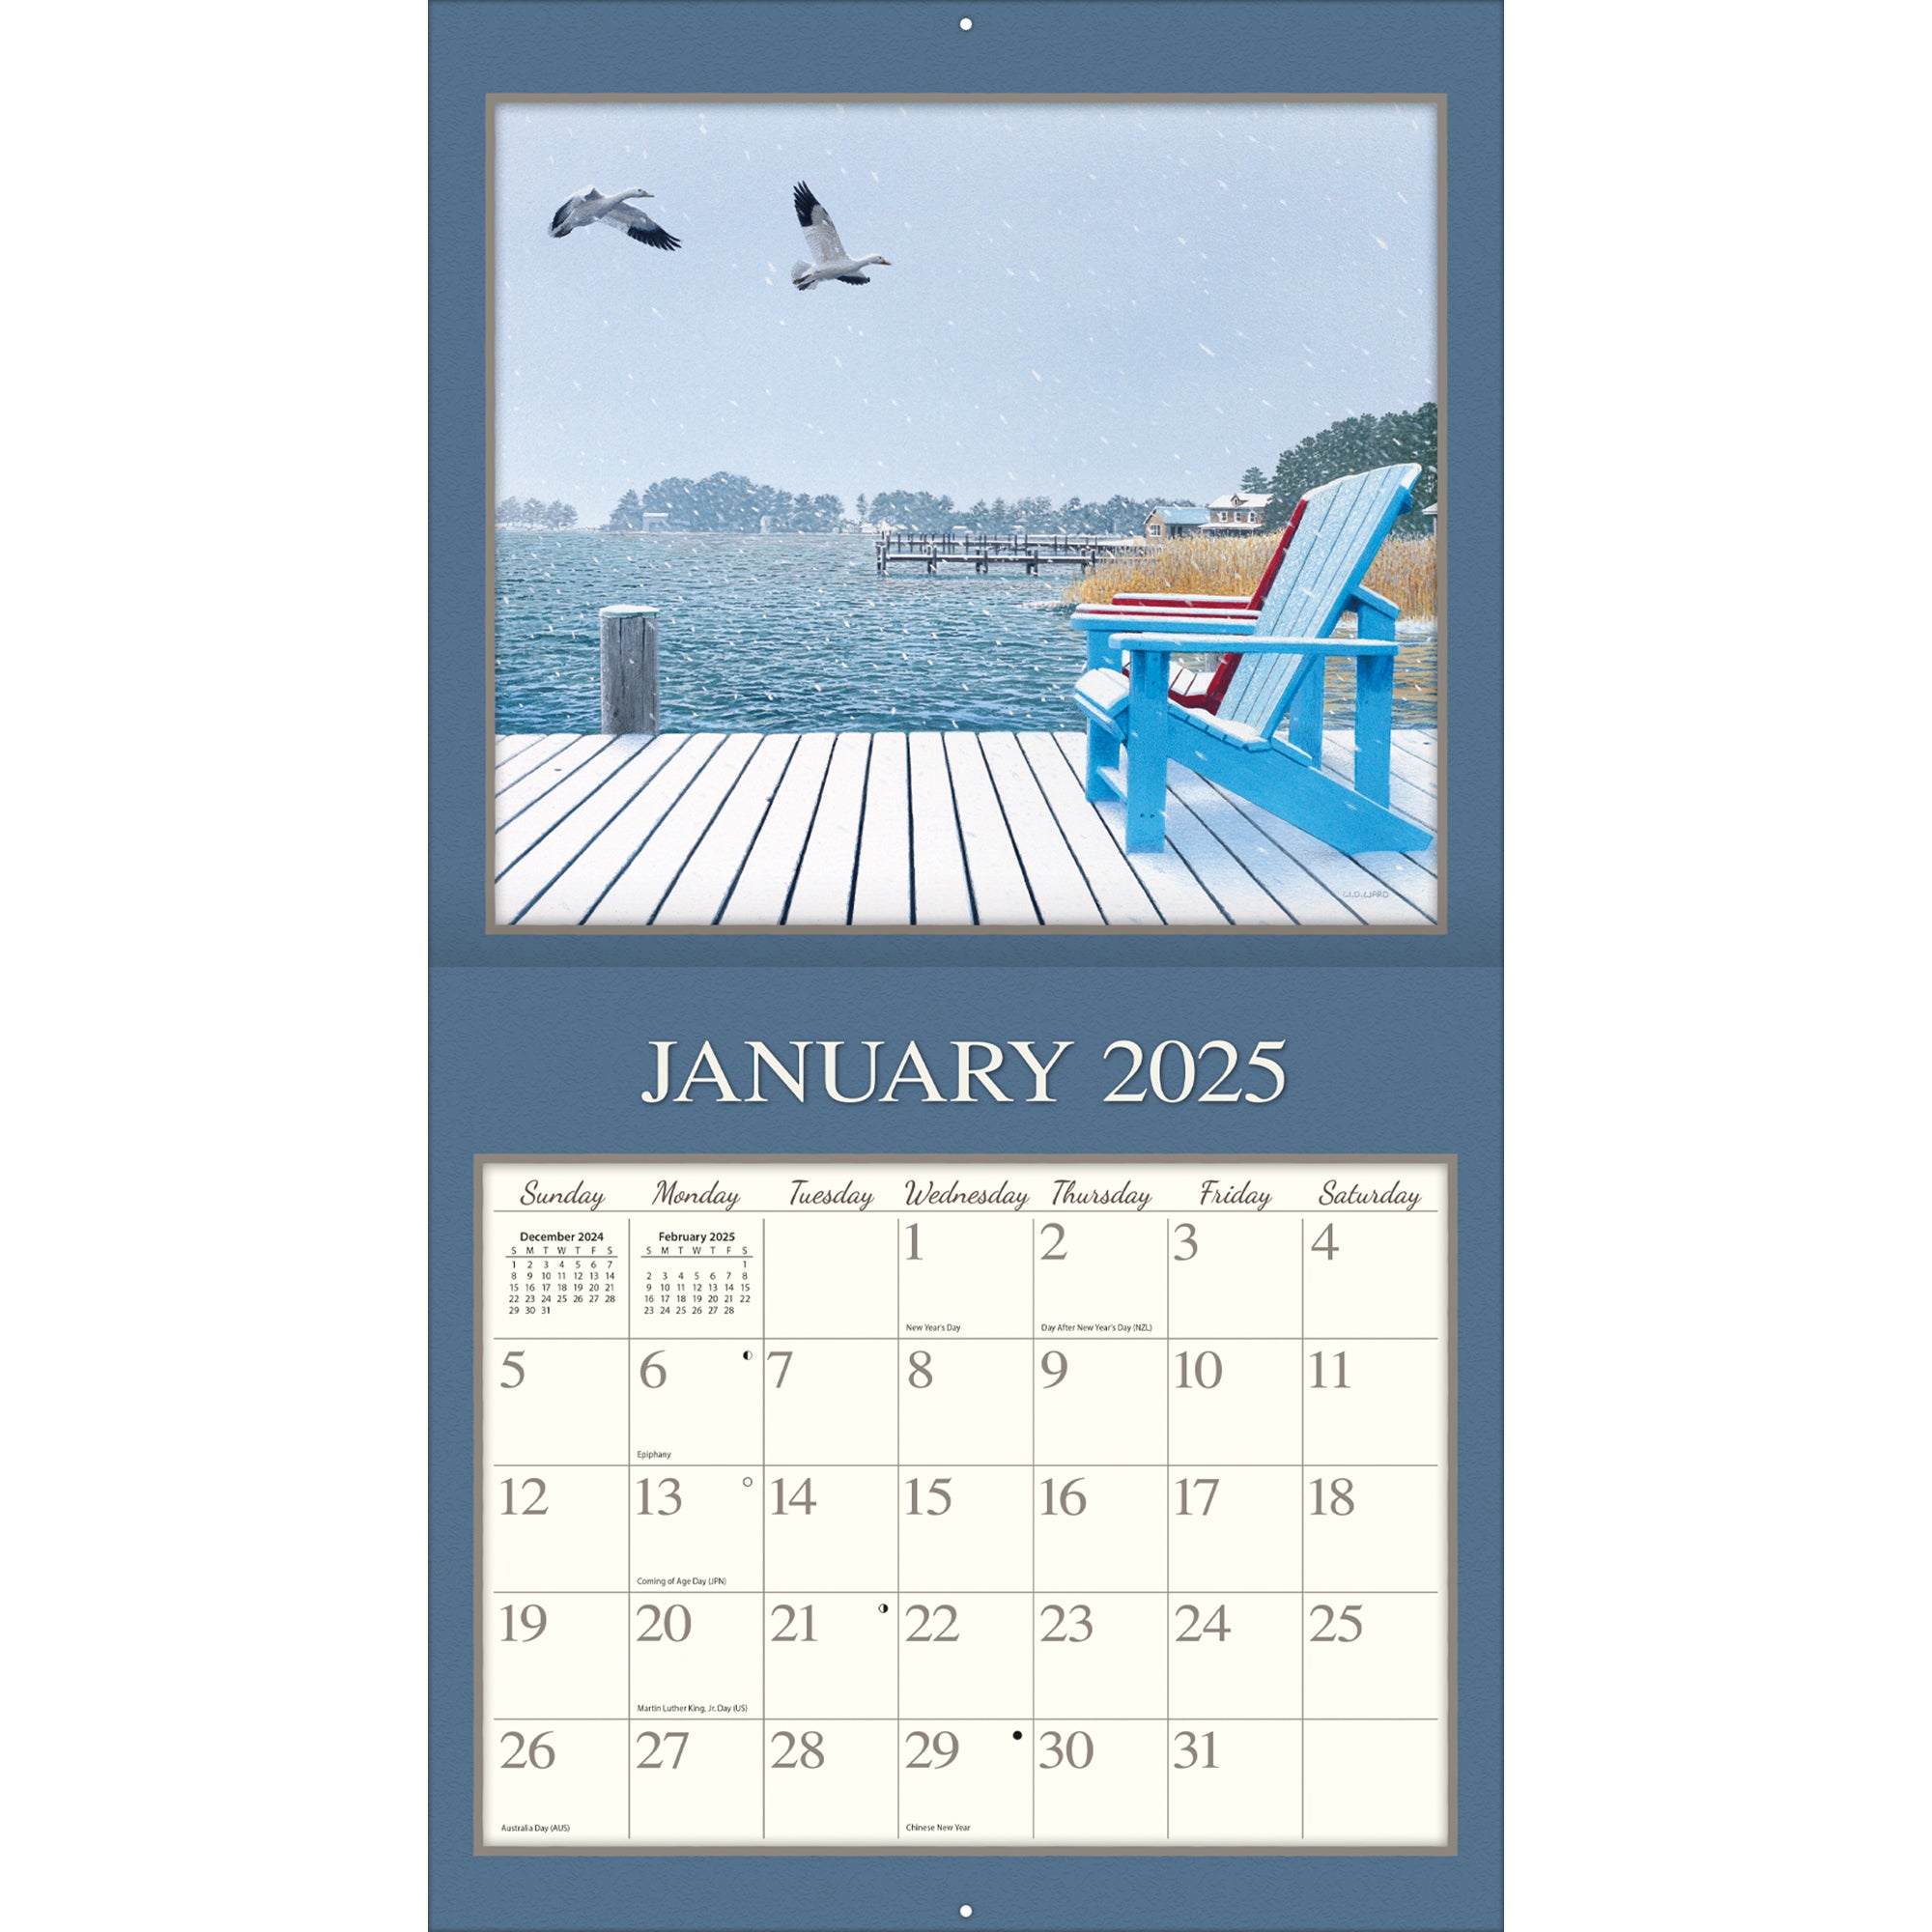 2025 LANG Cottage Country By David Ward - Deluxe Wall Calendar